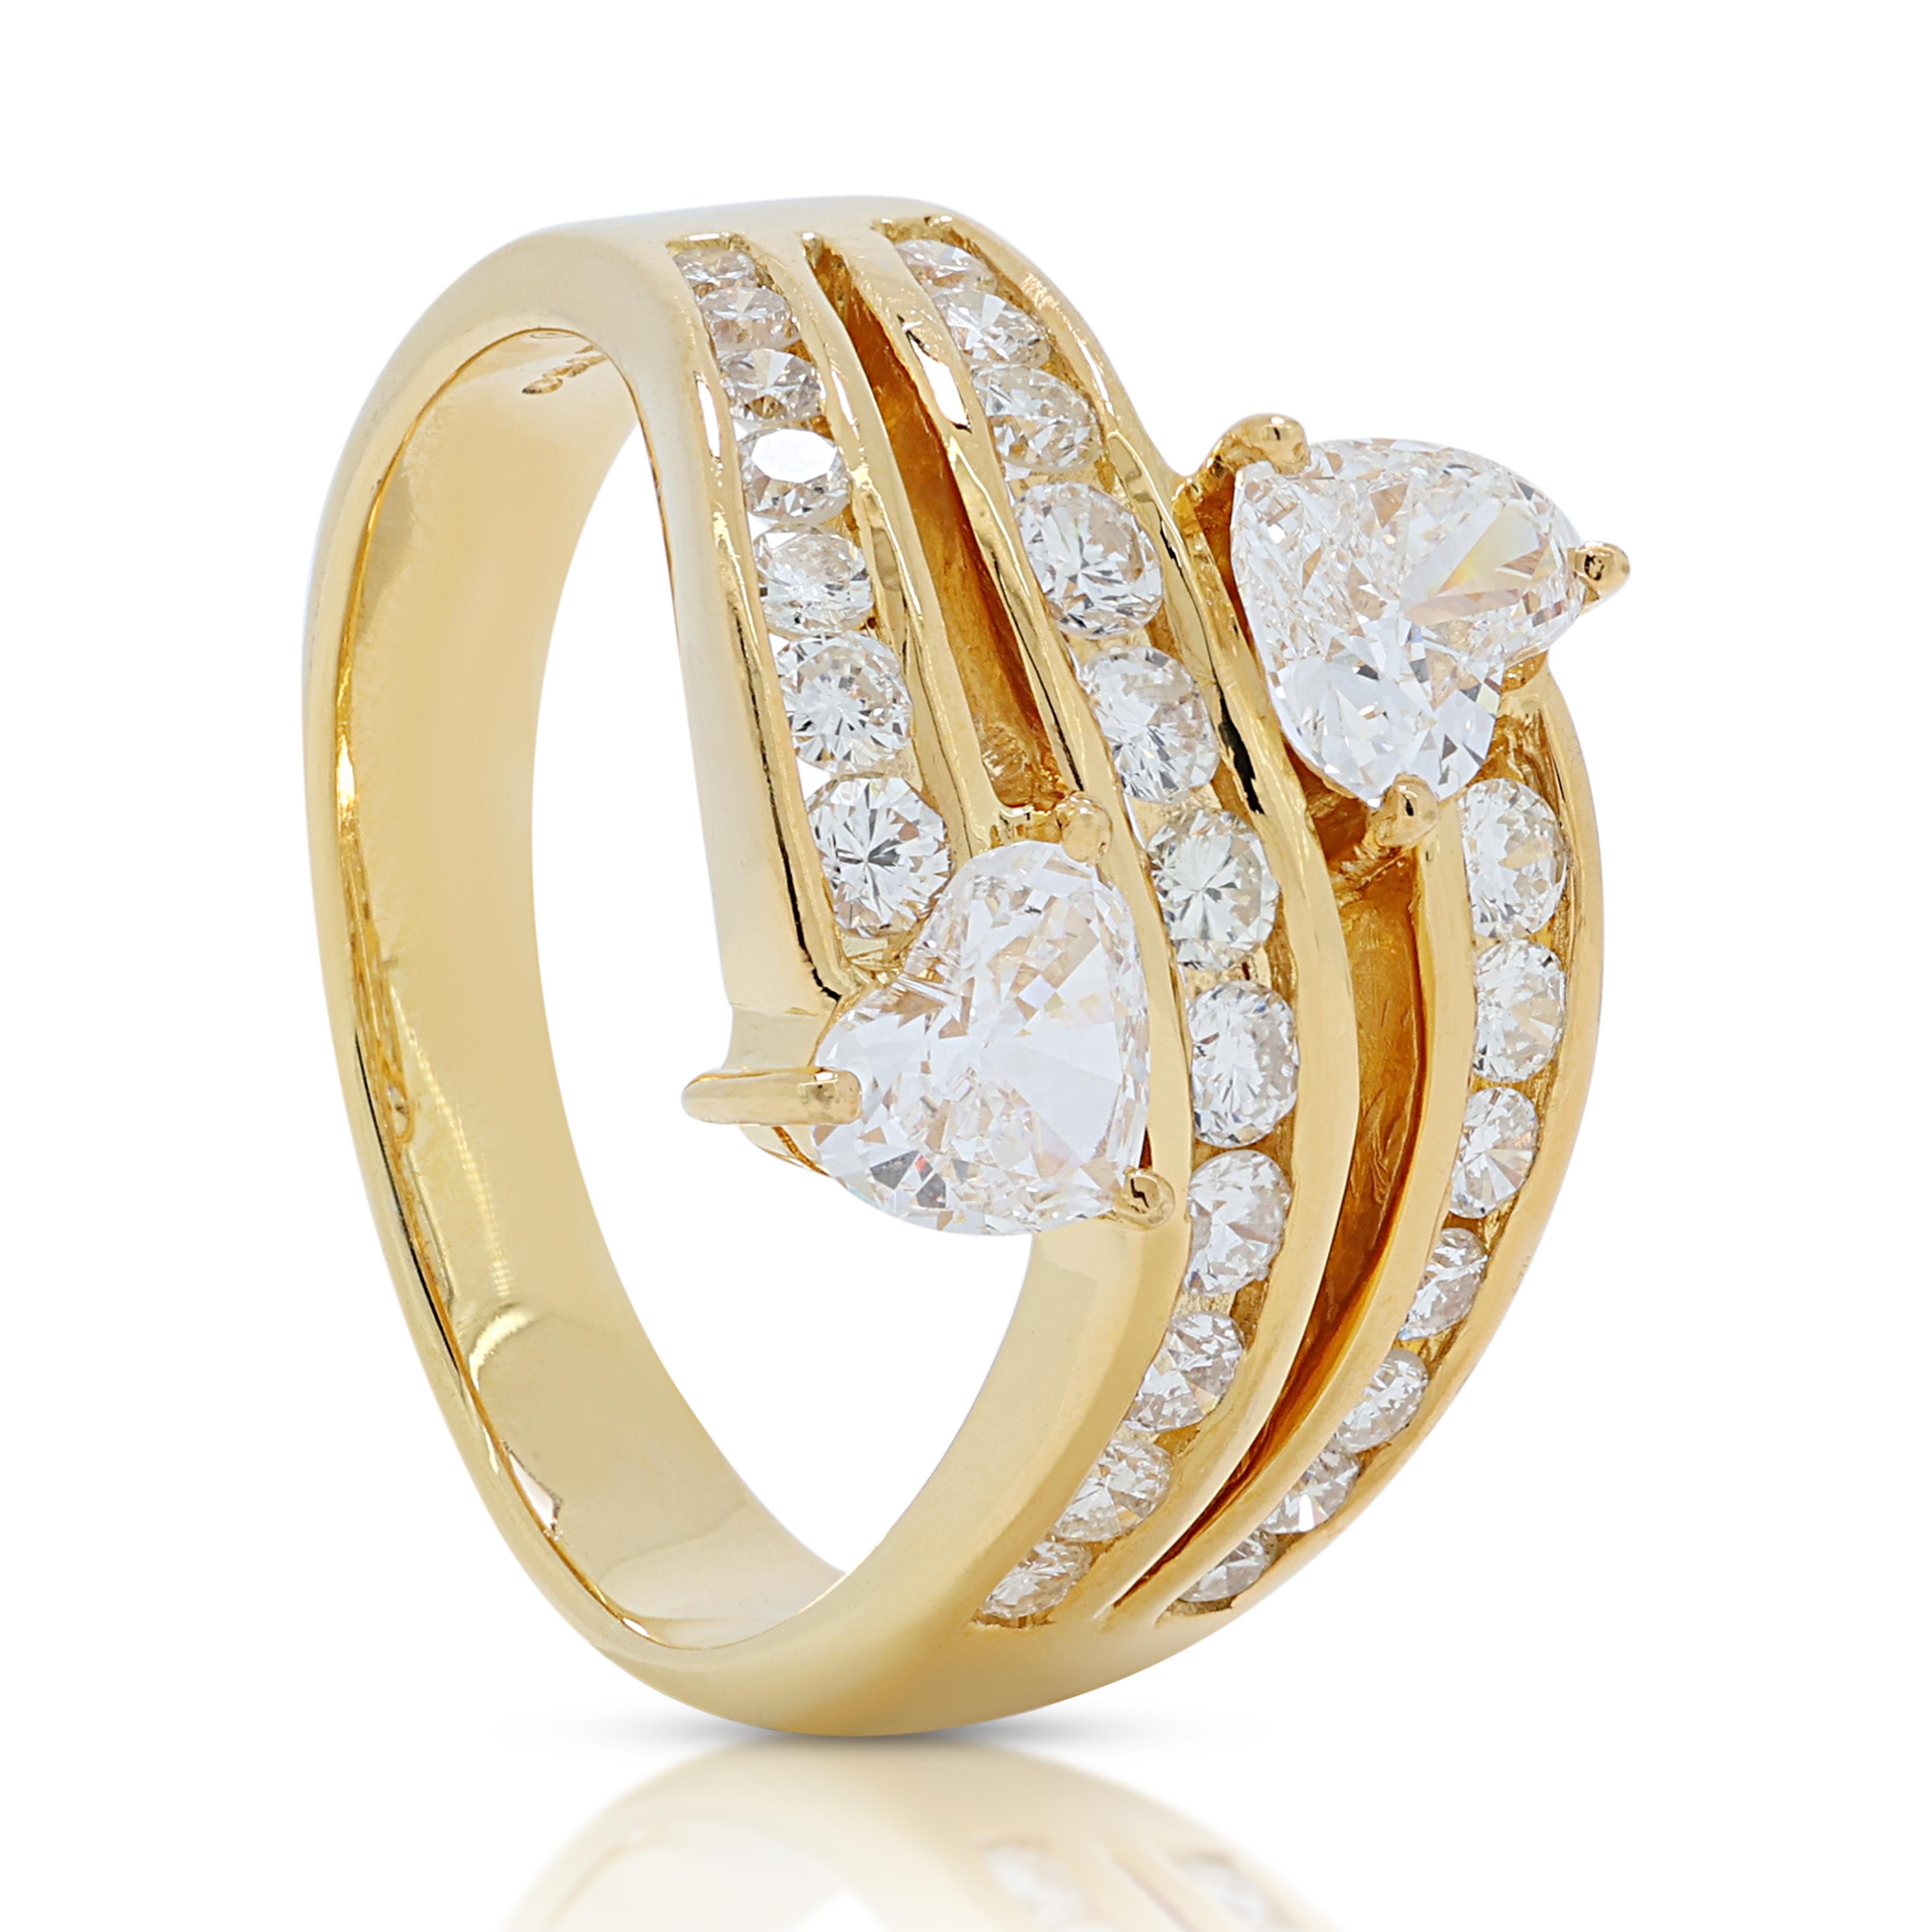 Sophisticated 1.12ct Heart-Shaped Diamonds Cluster Ring in 18k Yellow Gold In Excellent Condition For Sale In רמת גן, IL